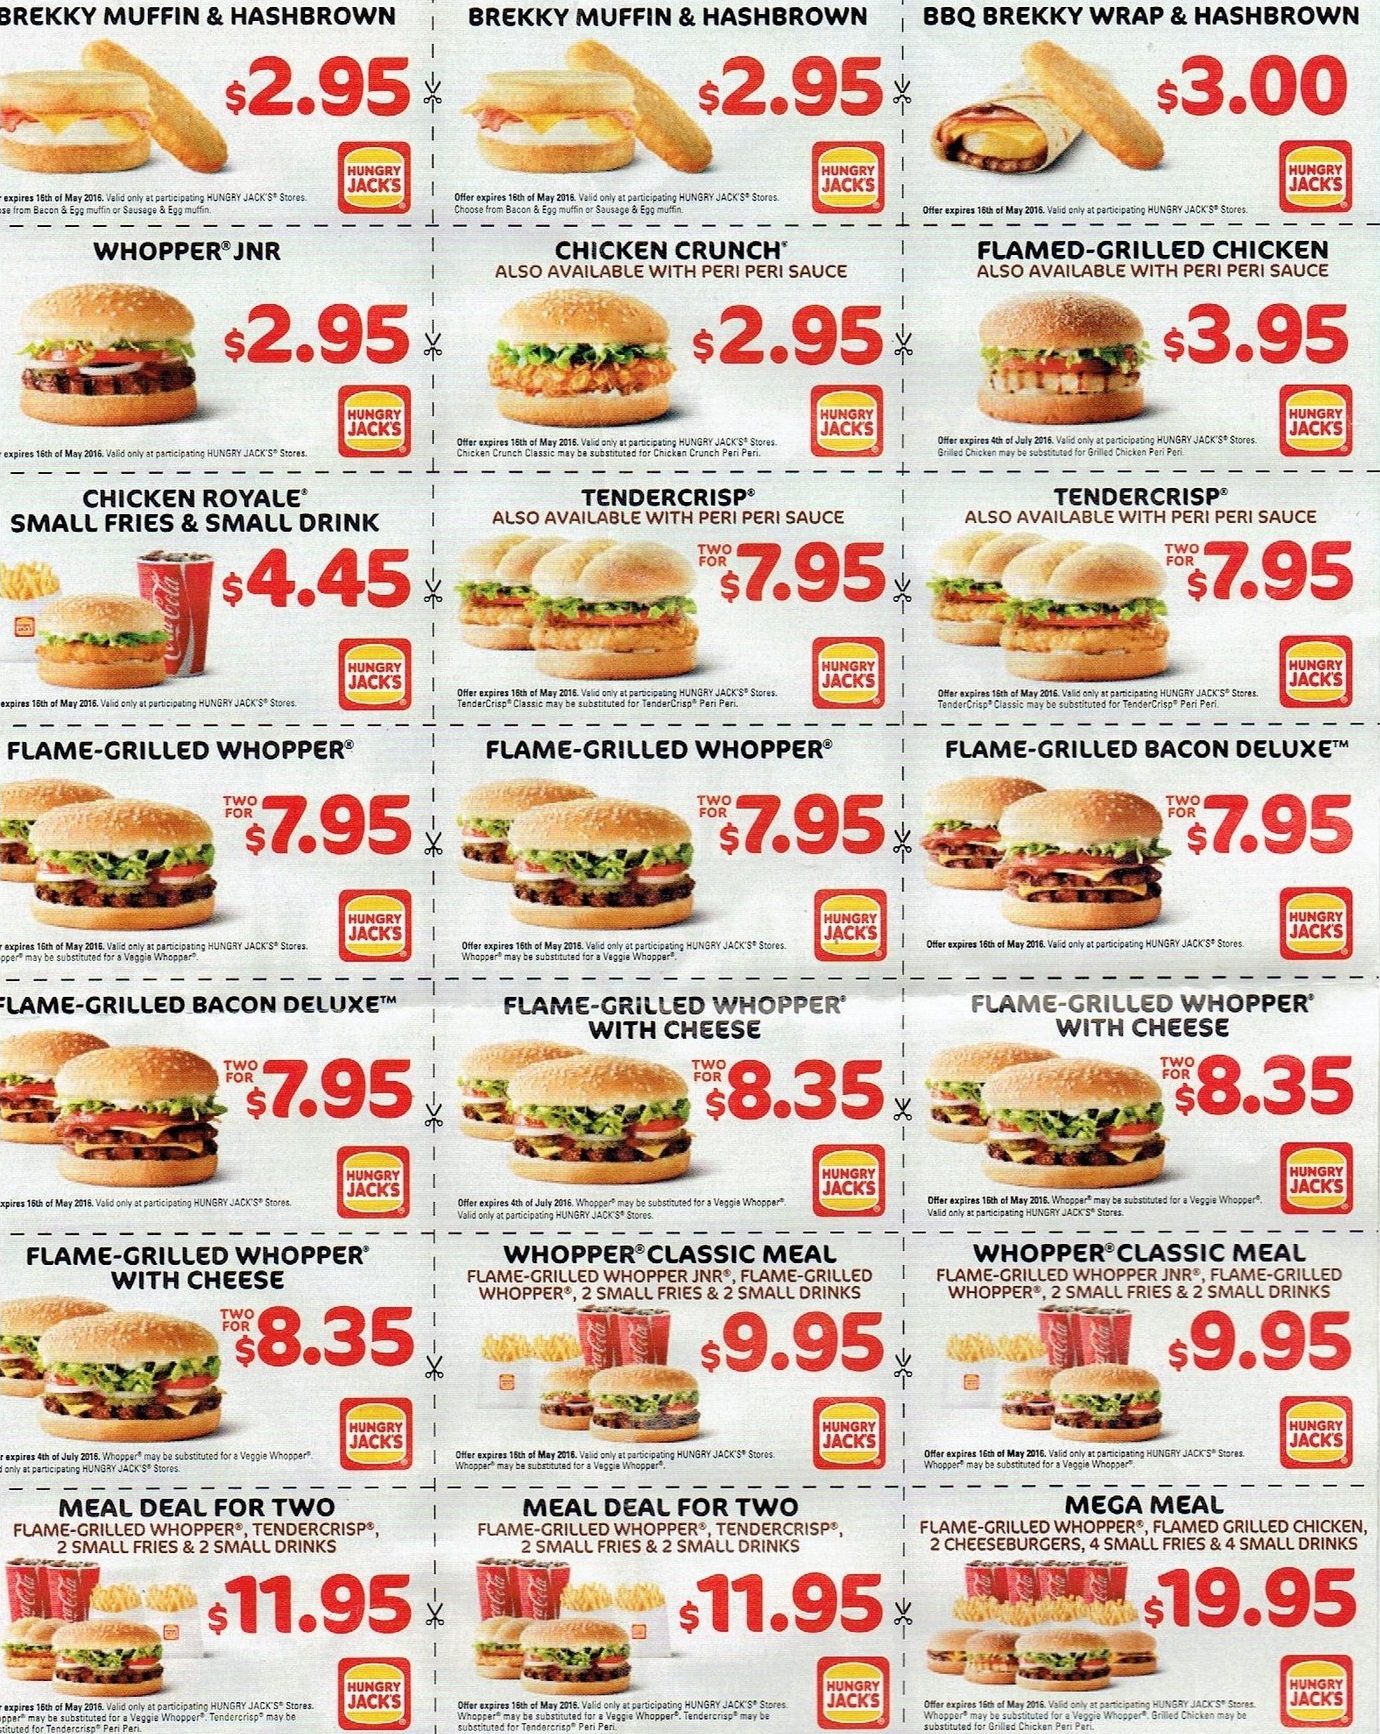 NEWS New Hungry Jack's Vouchers valid until 16 May 2016 frugal feeds